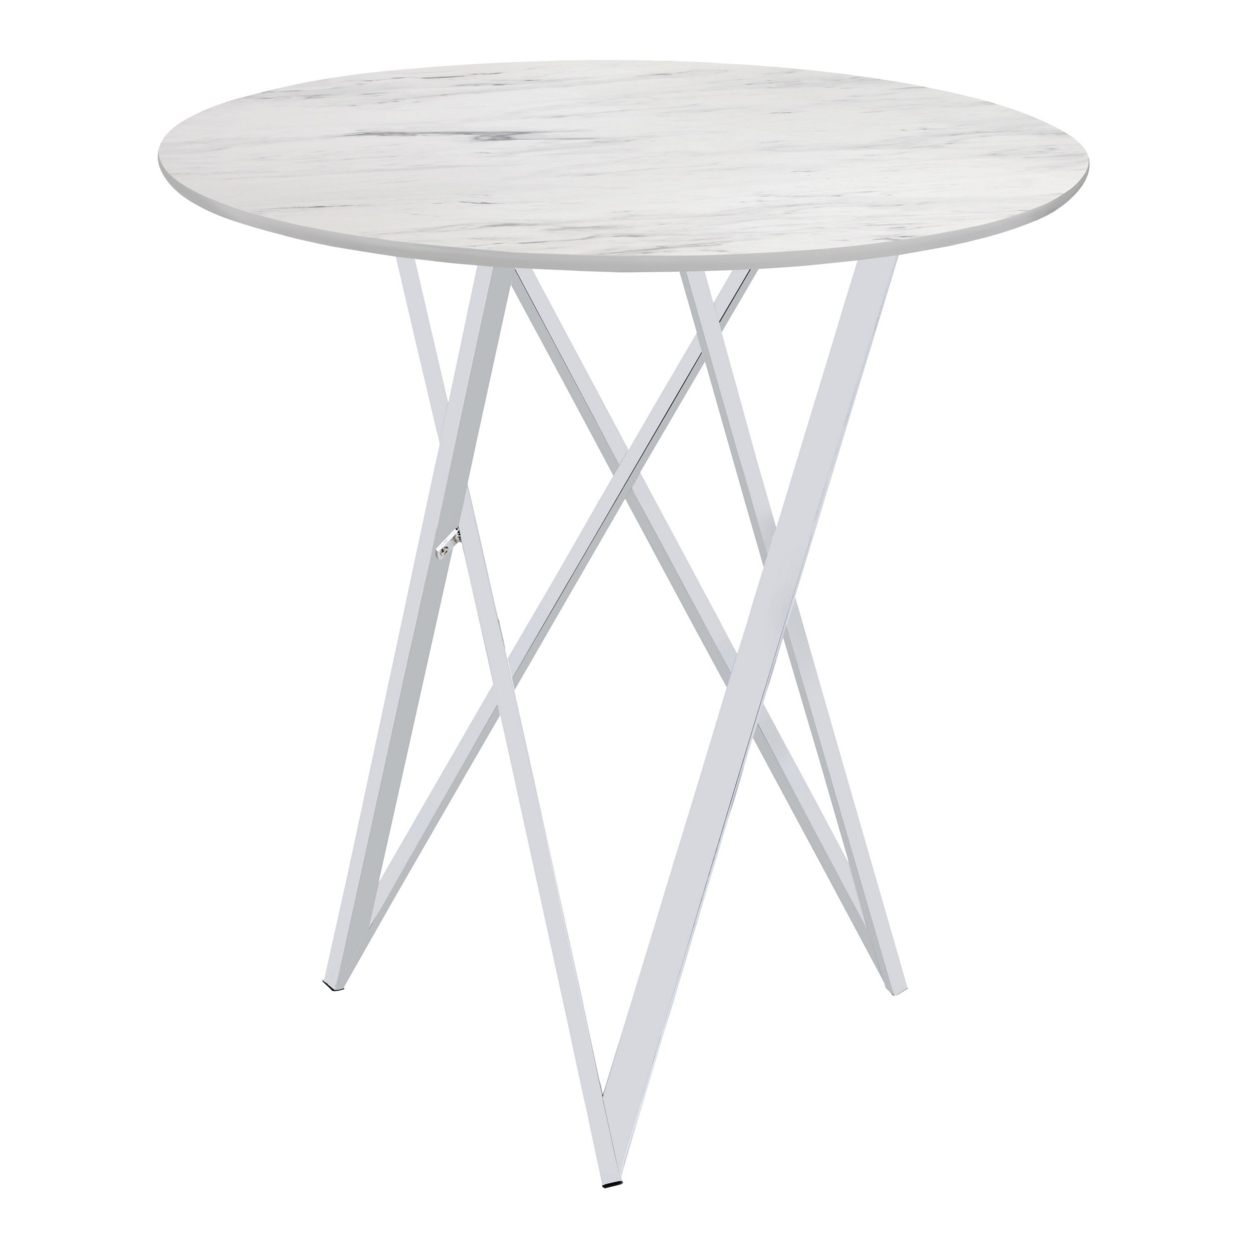 43 Inch Tall Bar Table, White Round Top, Art Deco Style Faux Marble Surface- Saltoro Sherpi